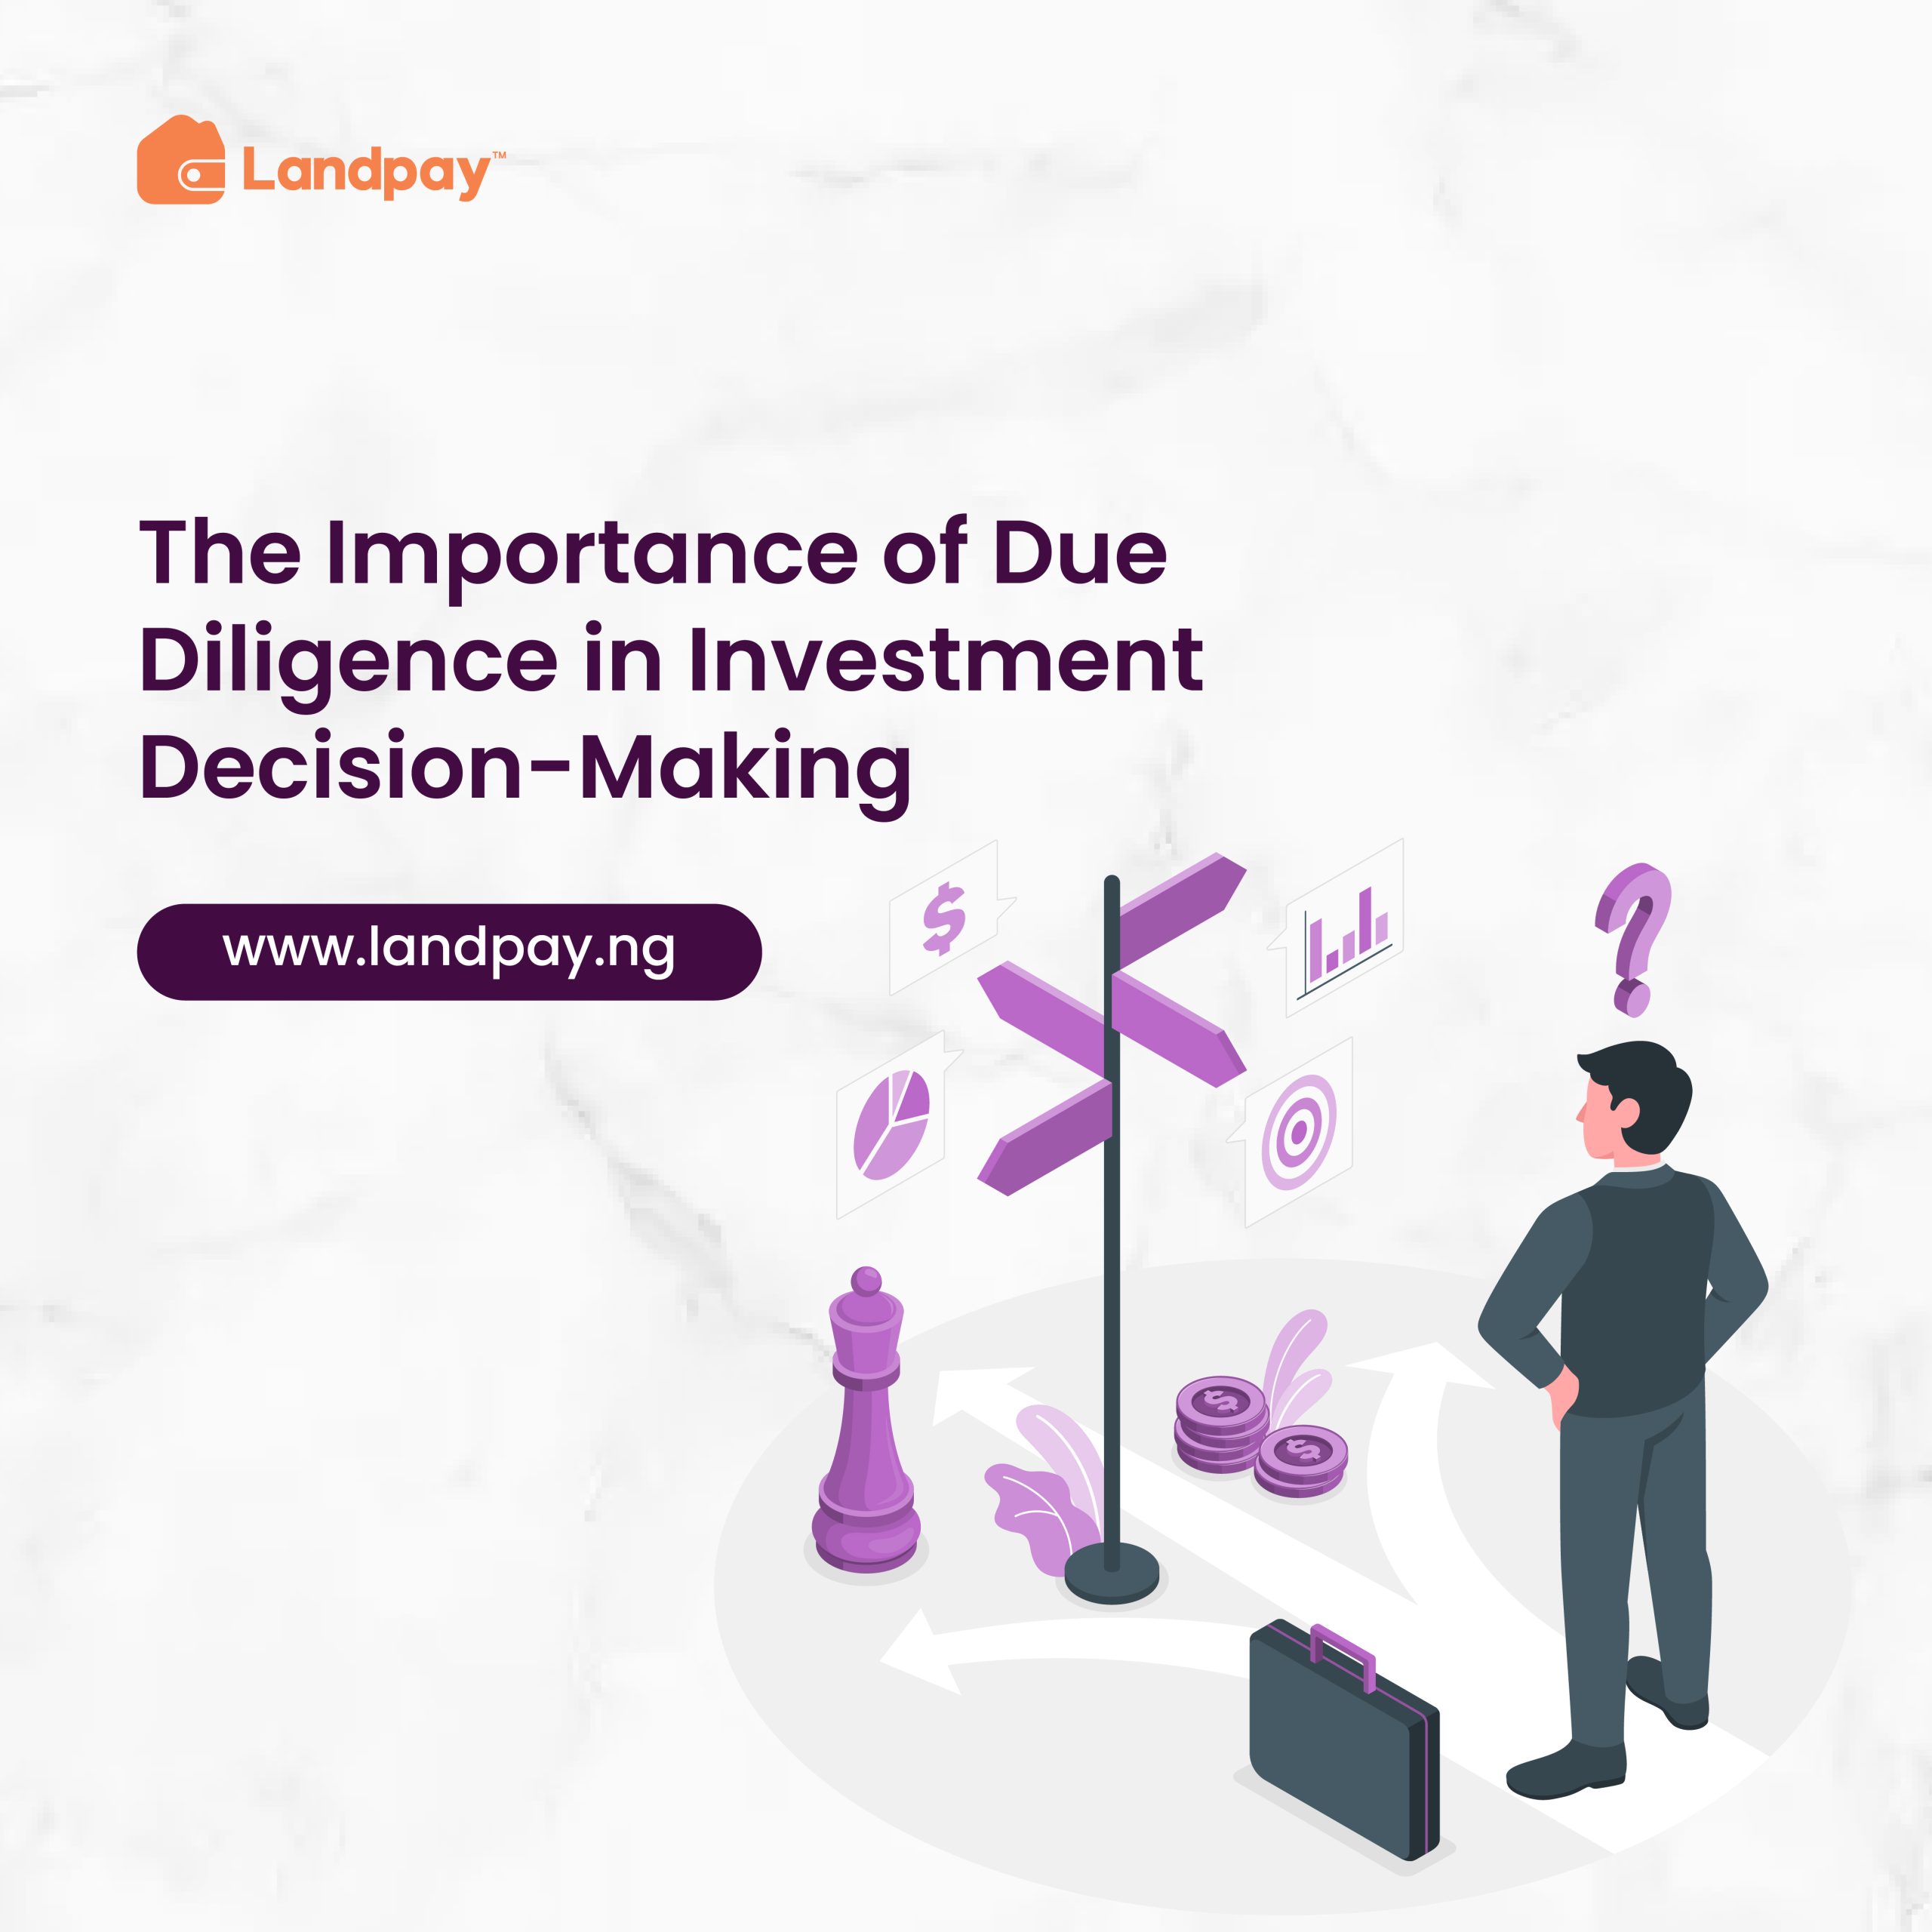 The Importance of Due Diligence in Investment Decision-Making